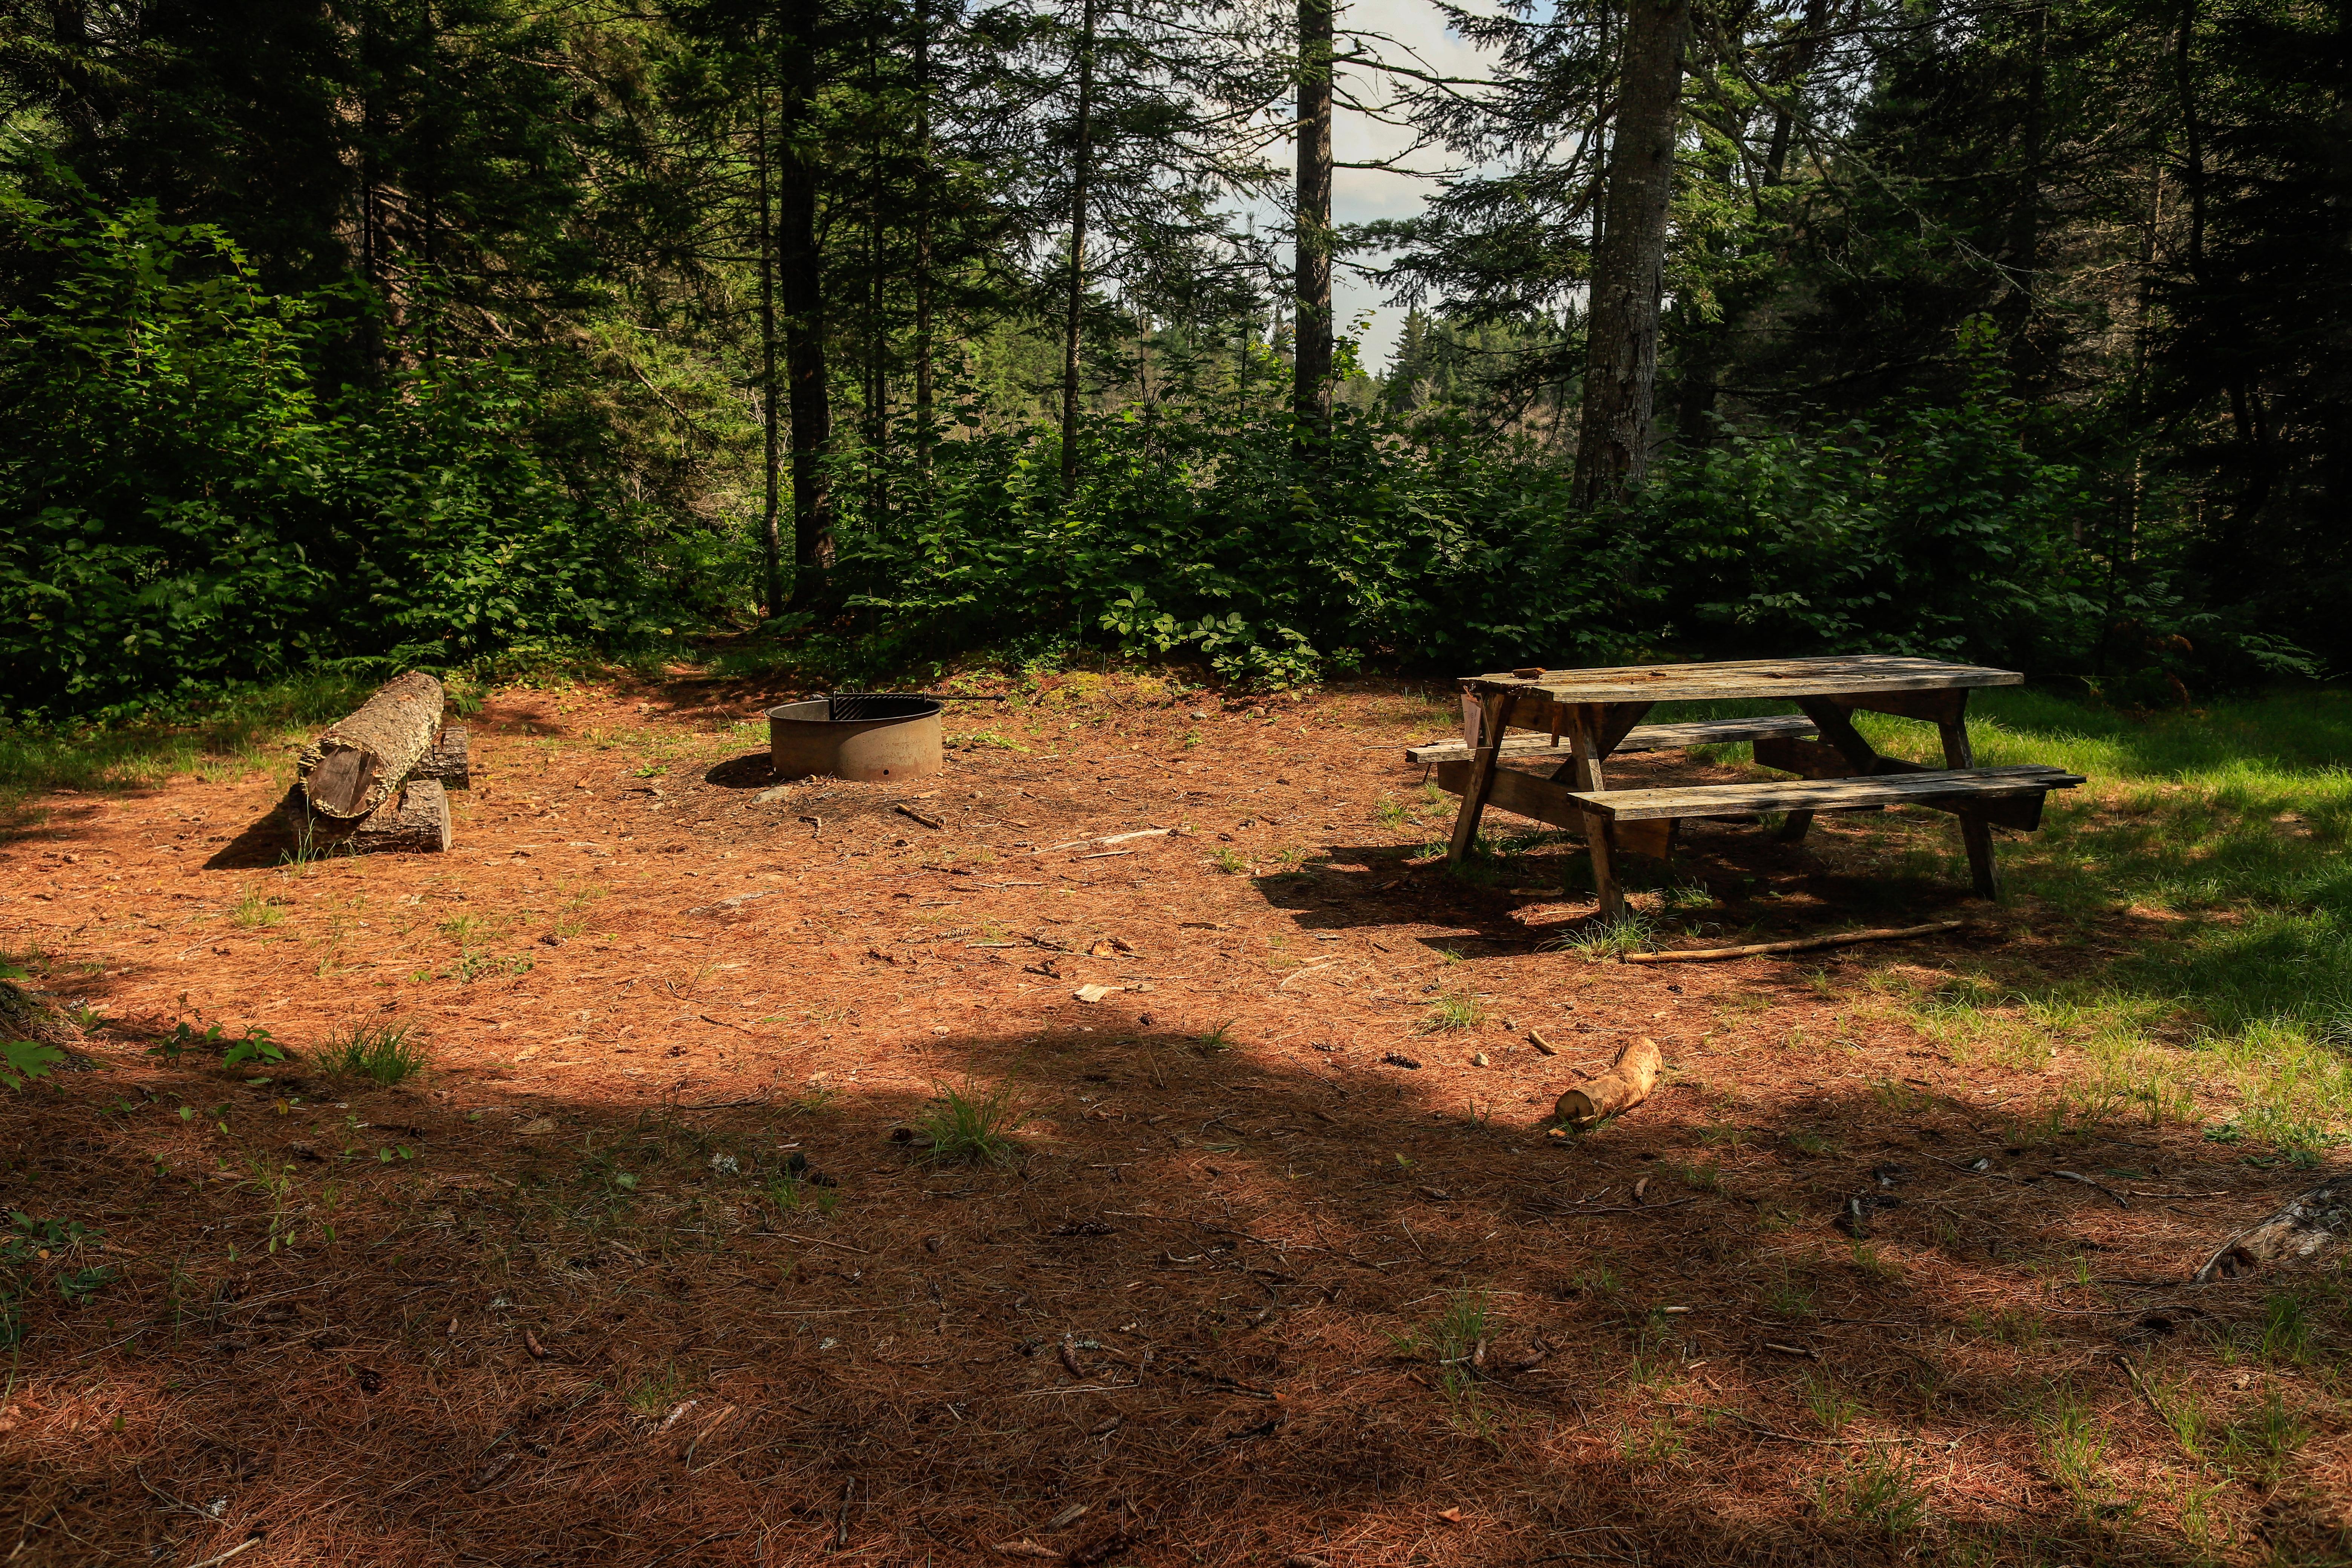 A mulchy clearing in the woods with a picnic table, firepit and log bench